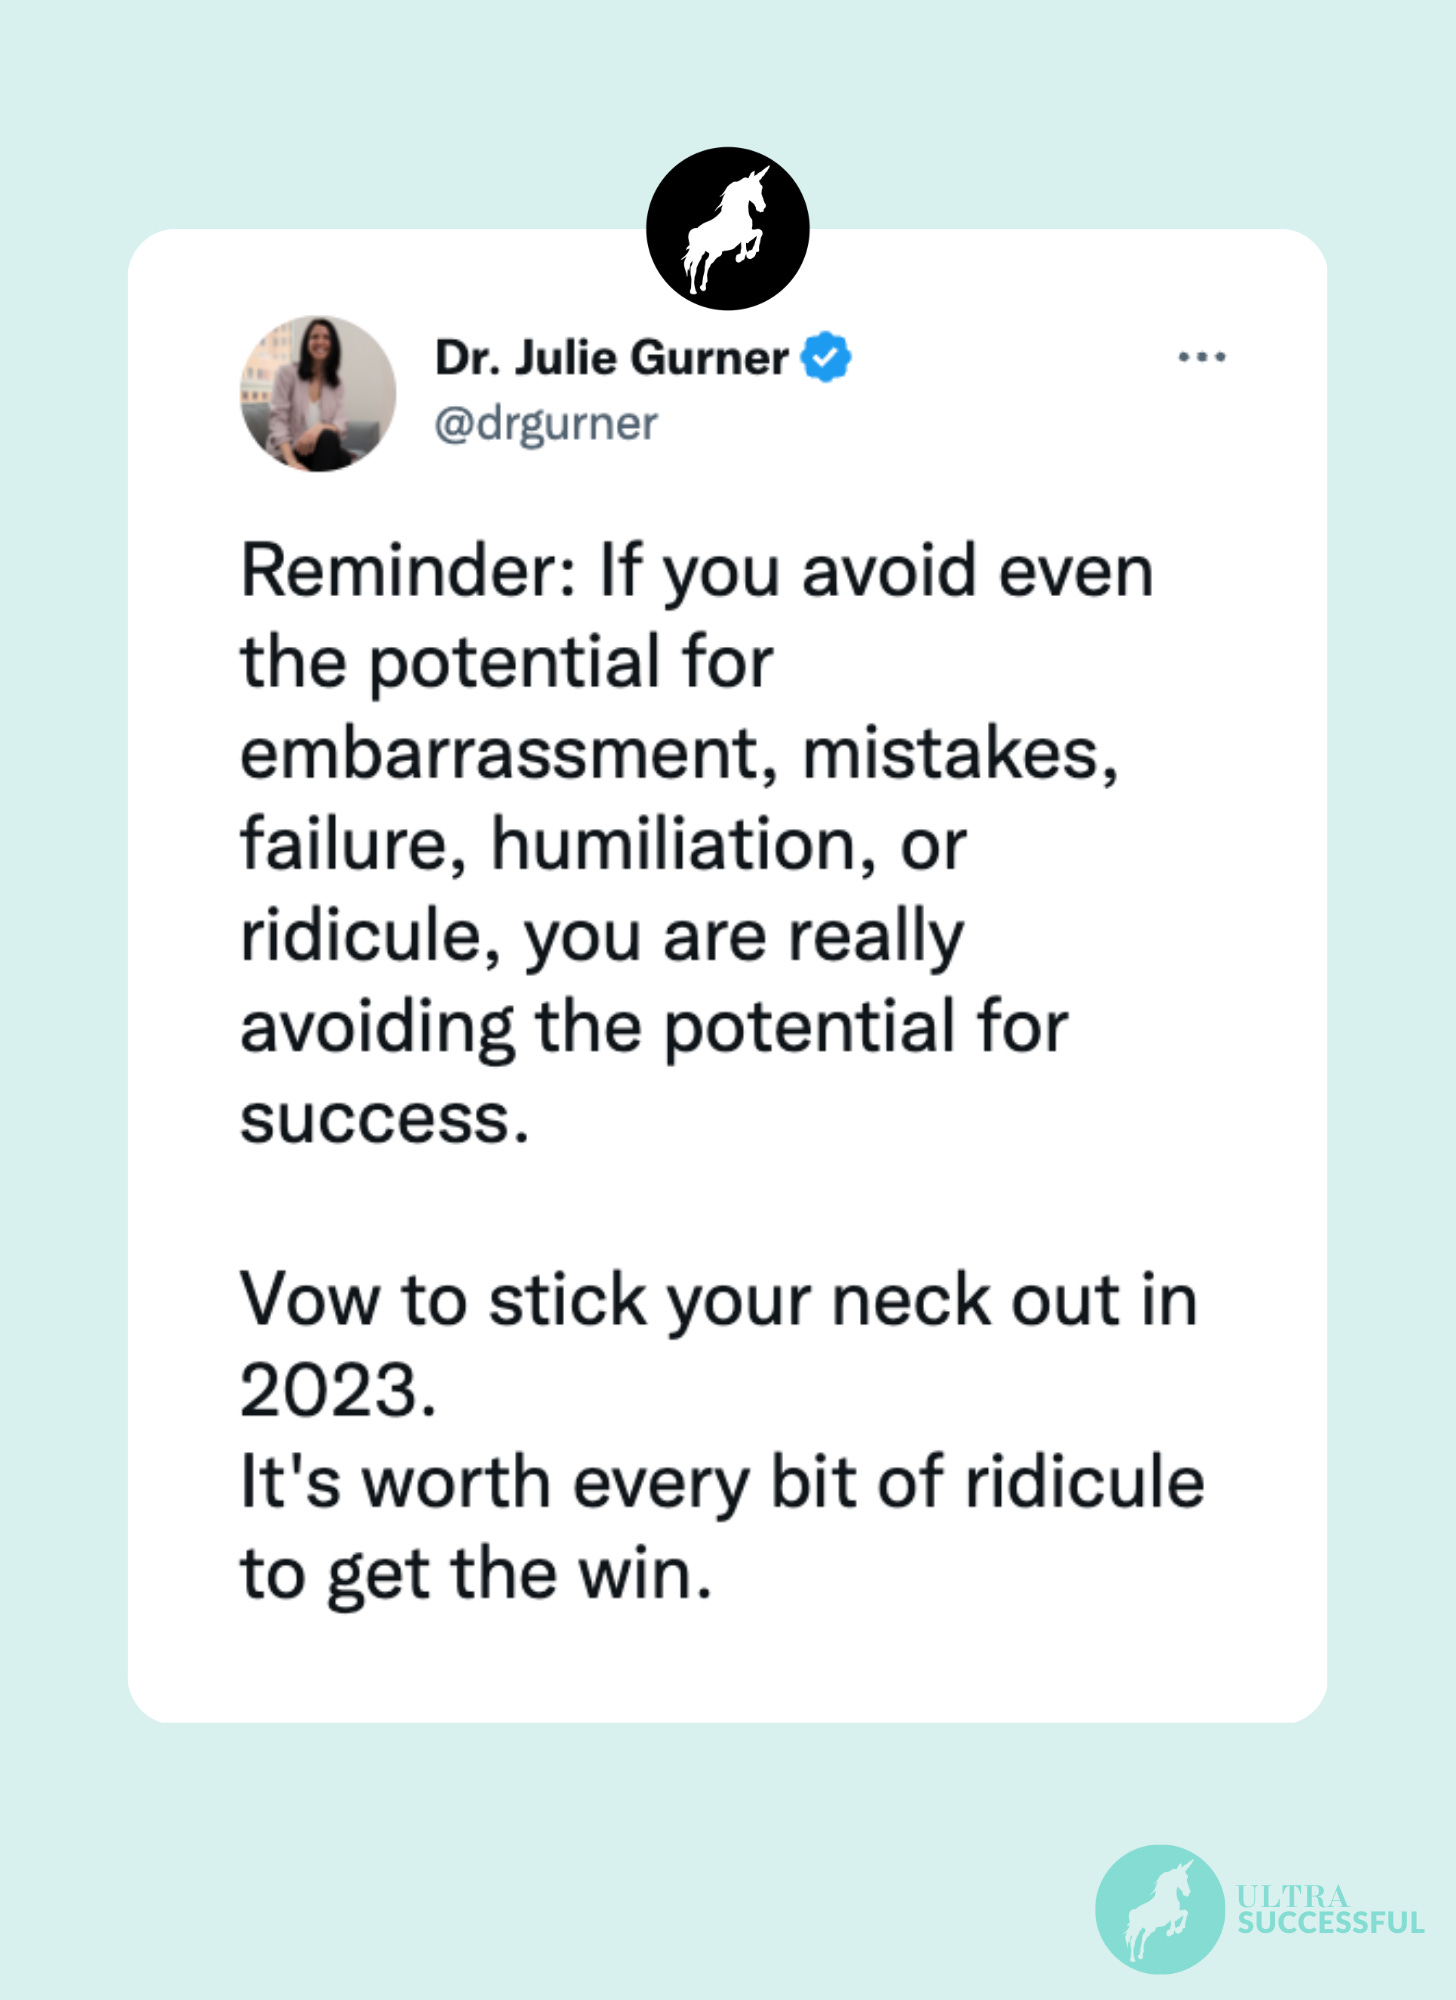 @drgurner: Reminder: If you avoid even the potential for embarrassment, mistakes, failure, humiliation, or ridicule, you are really avoiding the potential for success. Vow to stick your neck out in 2023. It's worth every bit of ridicule to get the win.